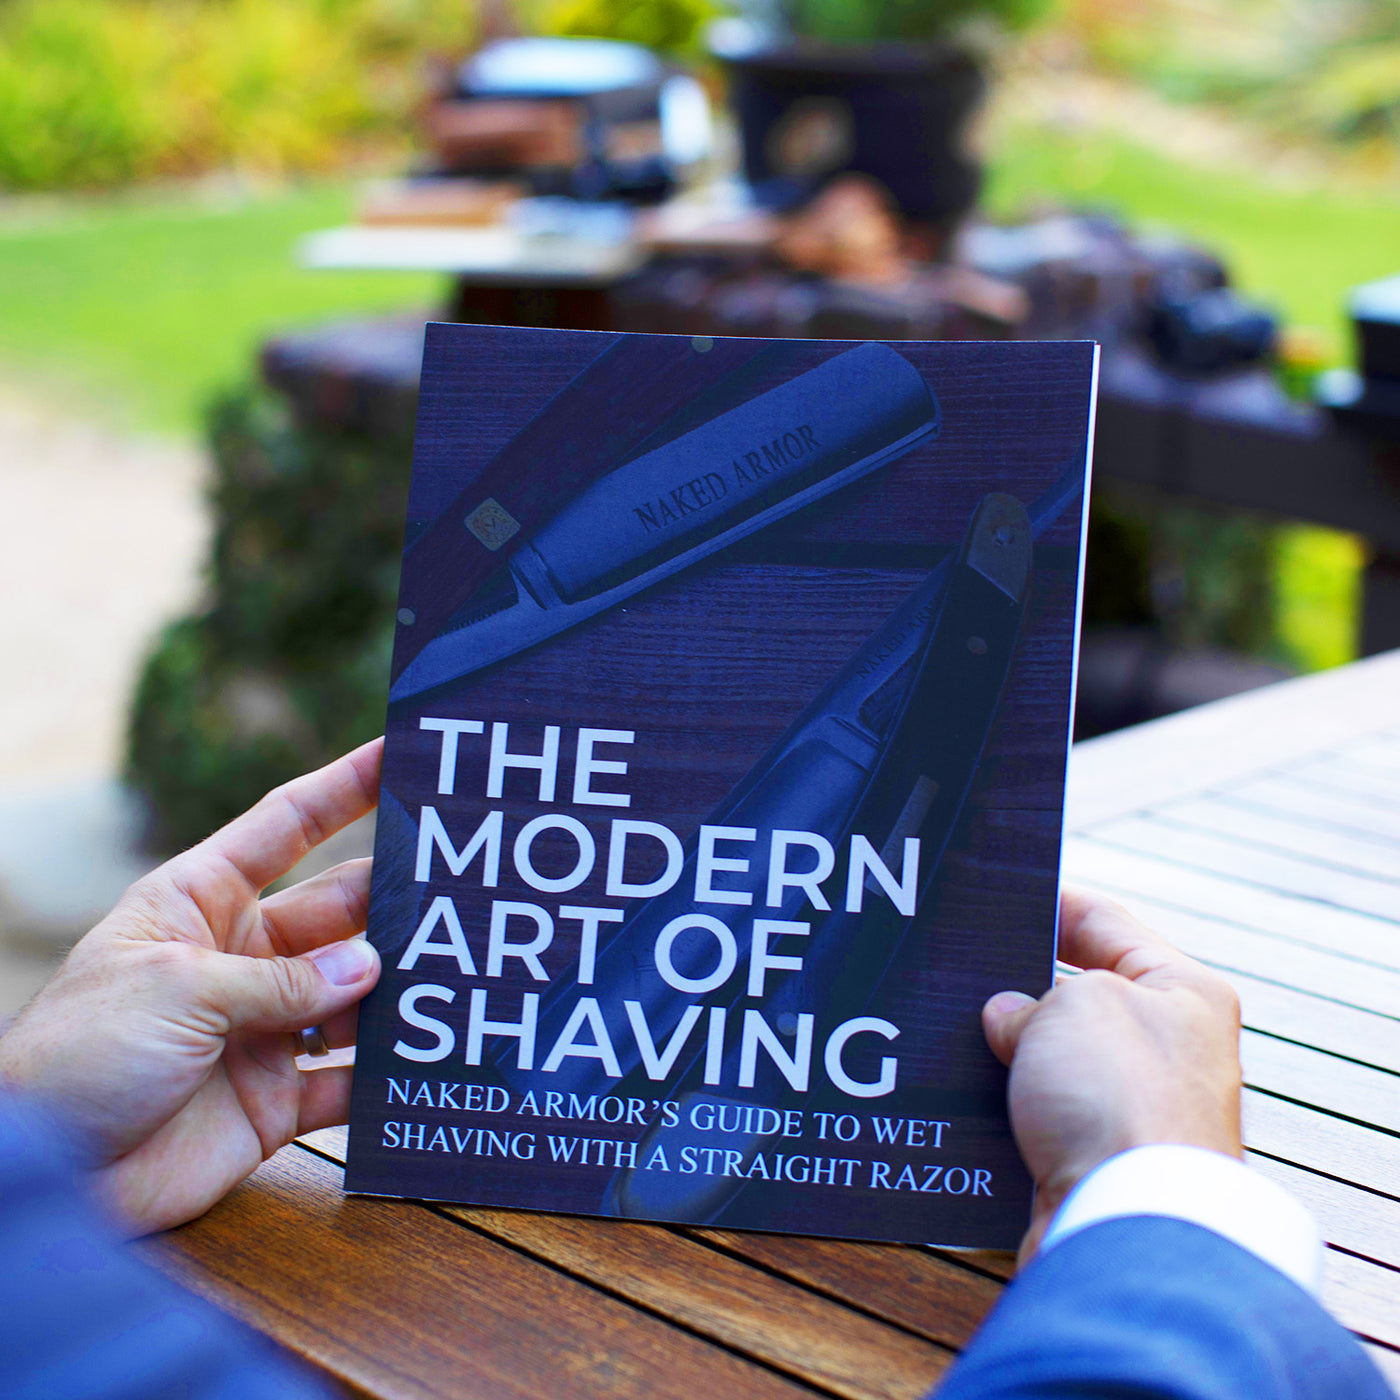  The Modern Art Of Shaving: Naked Armor's Guide to Wet Shaving with a Straight Razor by Naked Armor sold by Naked Armor Razors